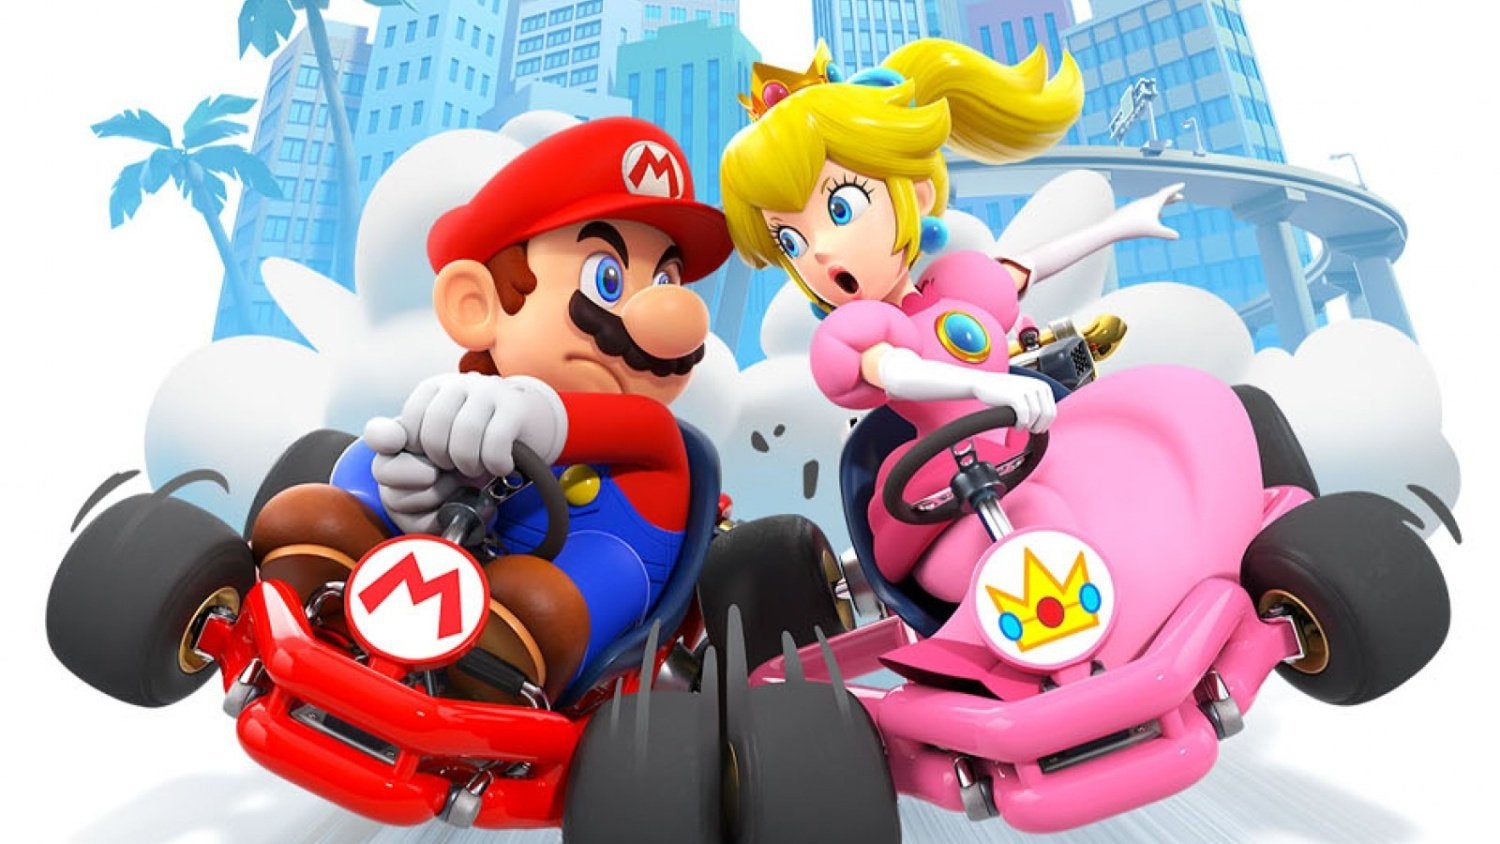 Image for Mario Kart Tour Battle Mode content unearthed